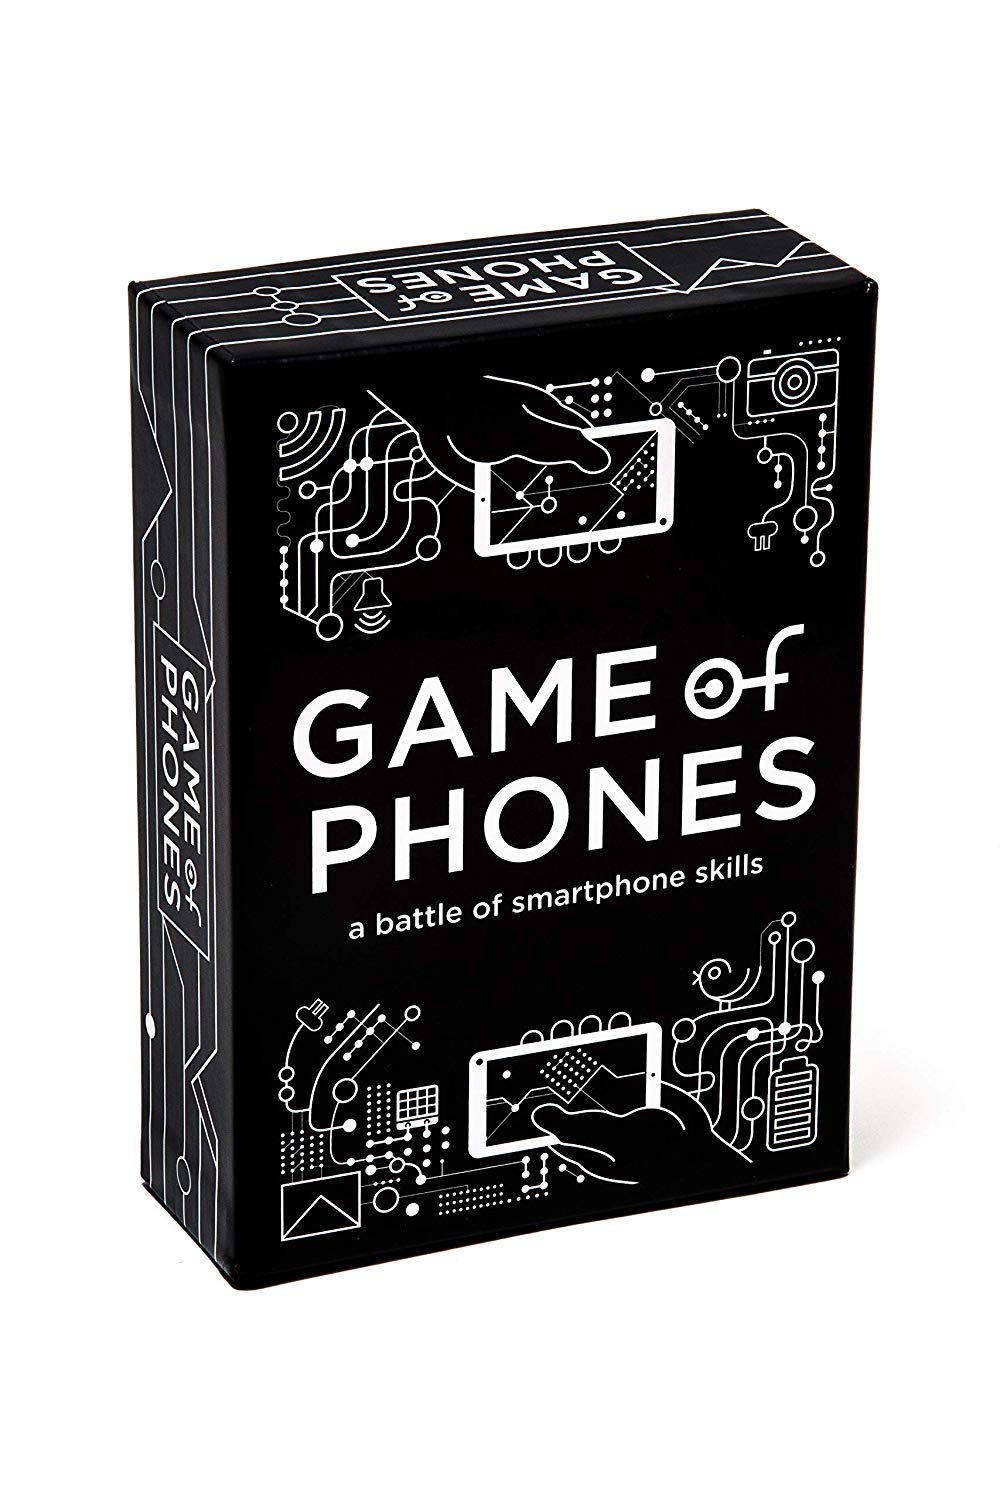 Game of Phones - image 1 of 6